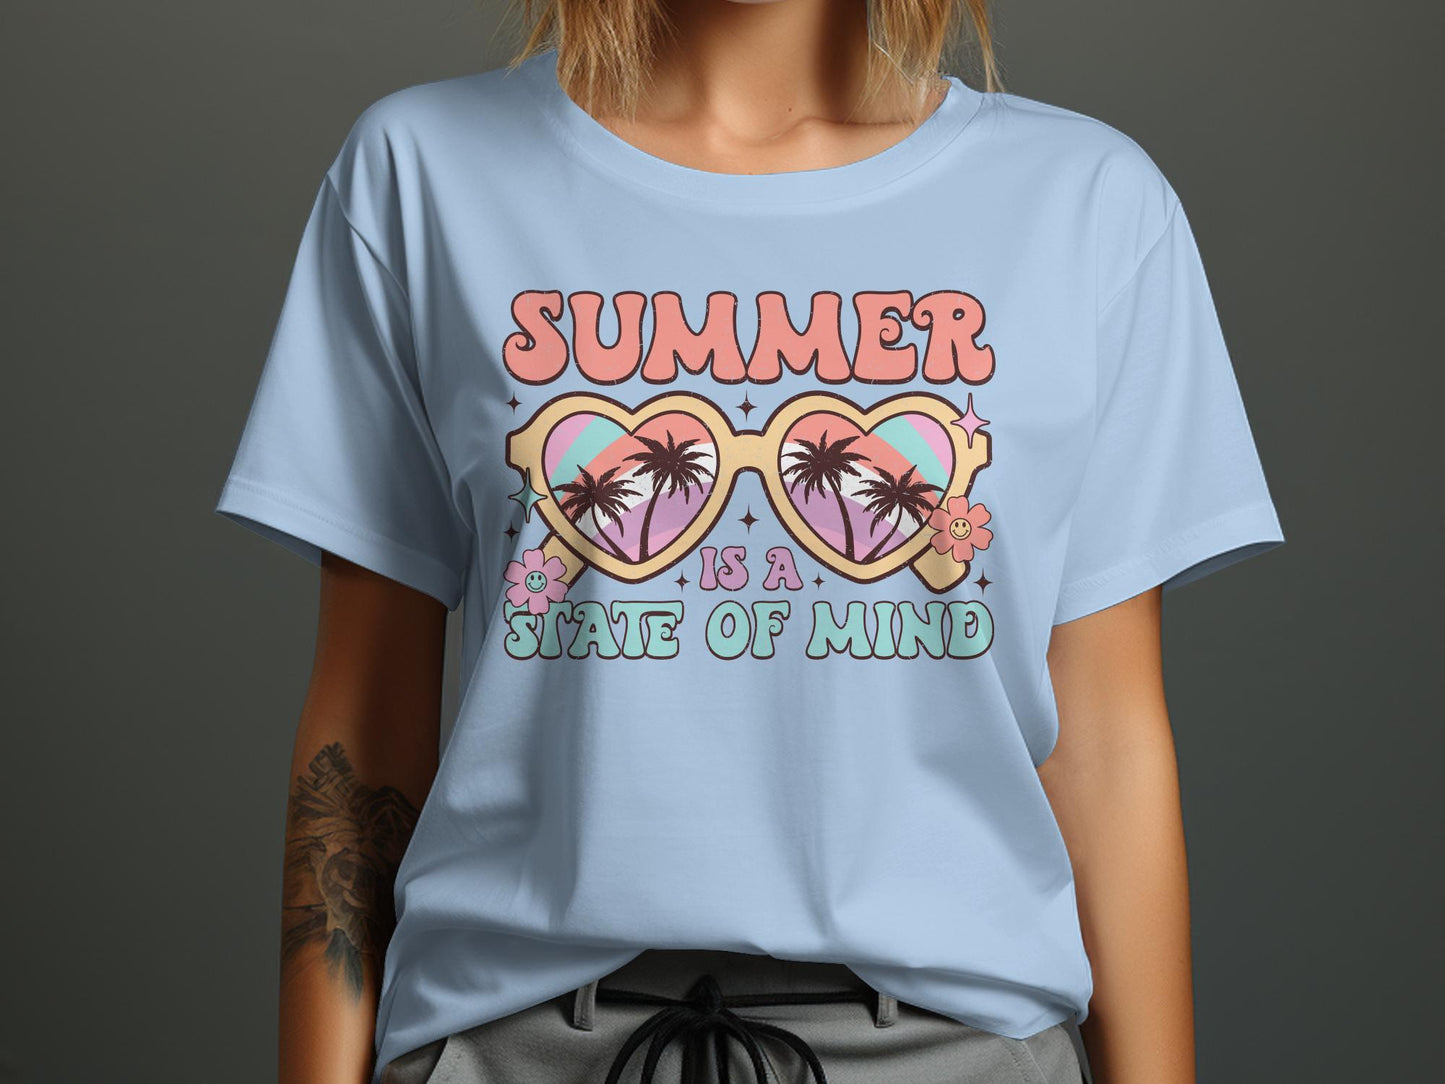 Tropical Summer Vibes T-Shirt, Heart Sunglasses Palm Trees, Beach Lover Tee, Retro Aesthetic Top, Vacation Clothing, Gift for Her